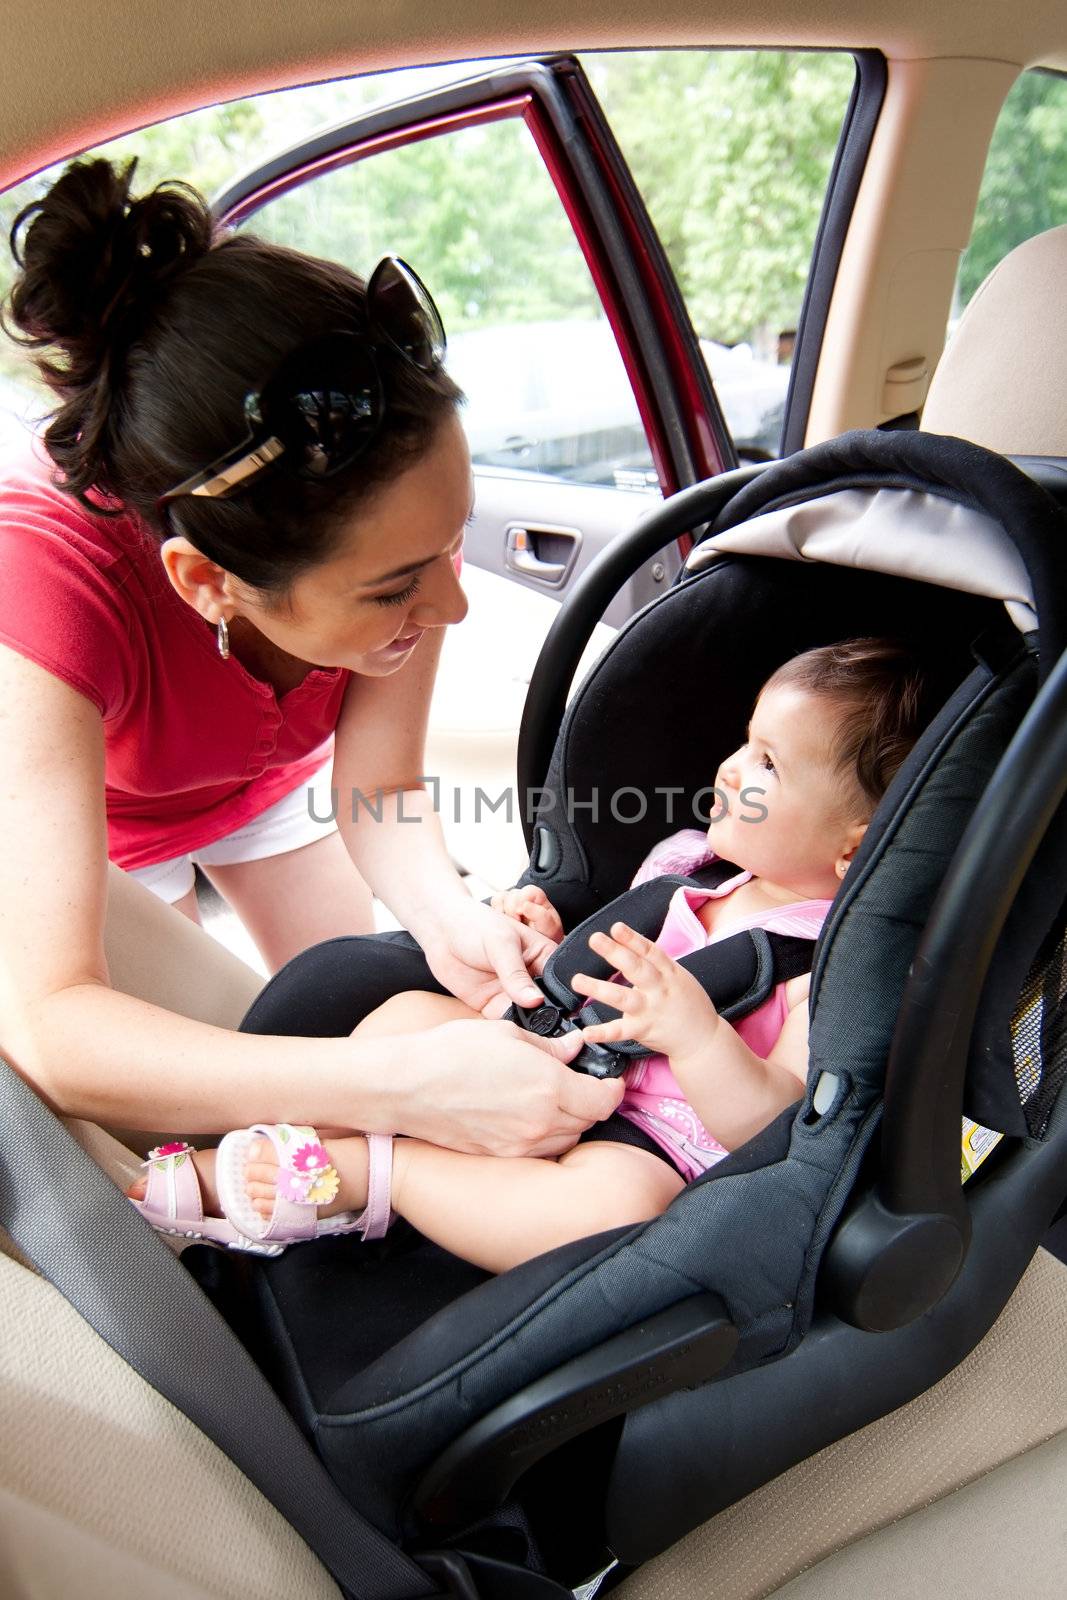 Baby in car seat for safety by phakimata